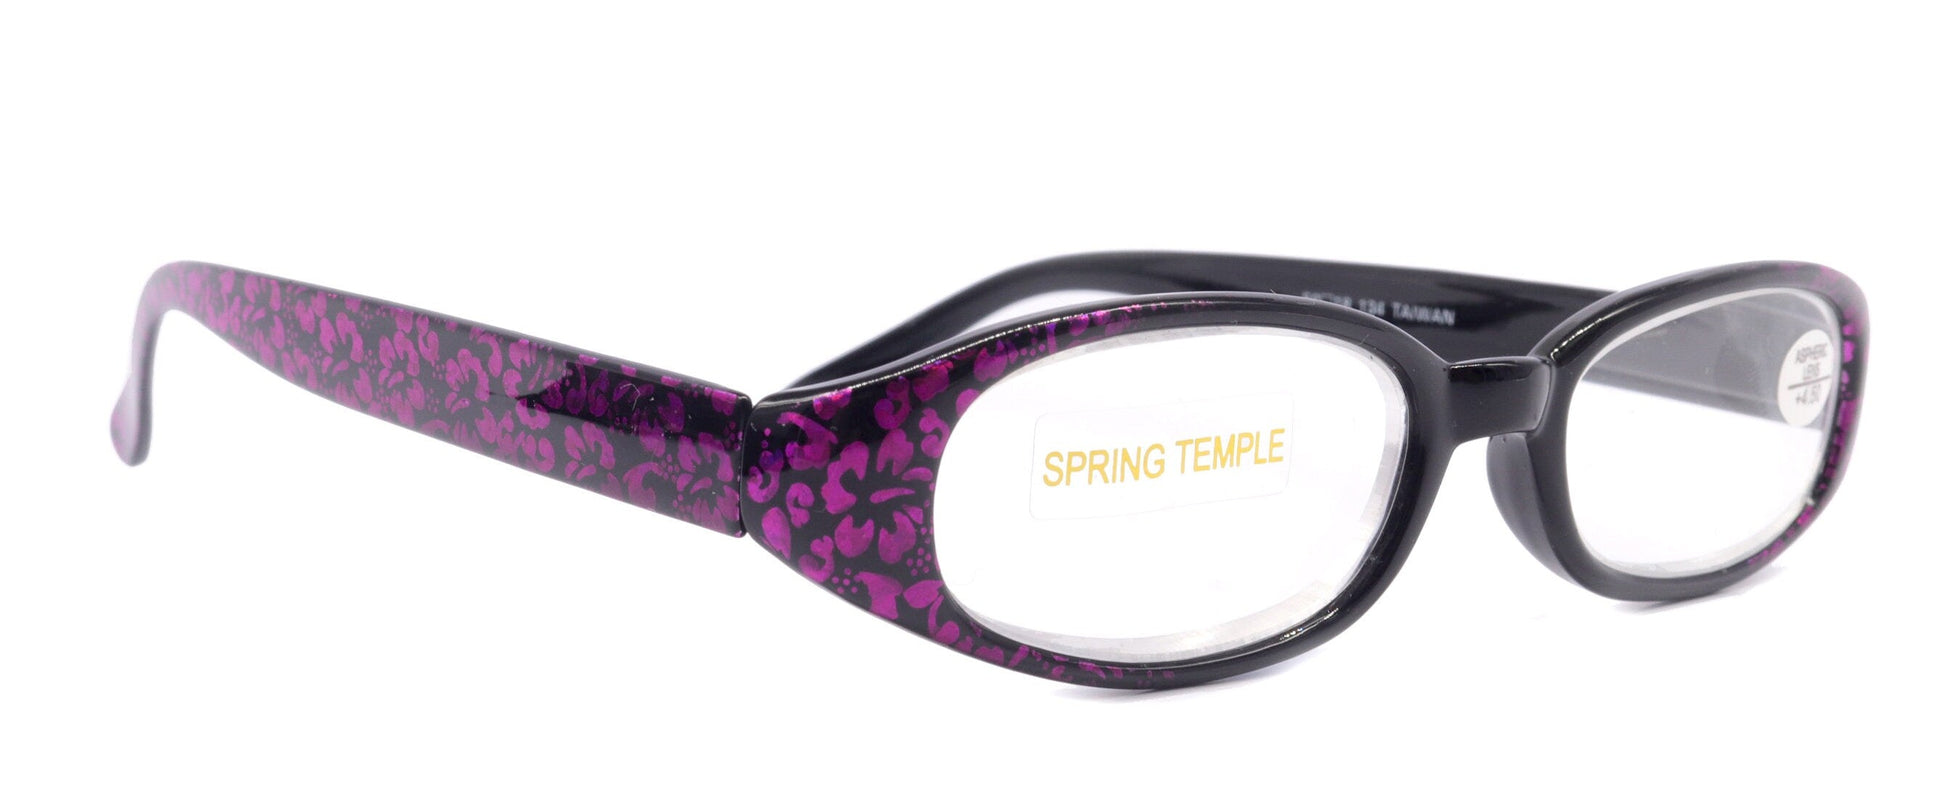 Isabella, (Premium) Reading Glasses, Fashion Reader (Floral Purple n Black) Oval +4 +4.5 +5 +6 High Power, NY Fifth Avenue (Wide Frame)